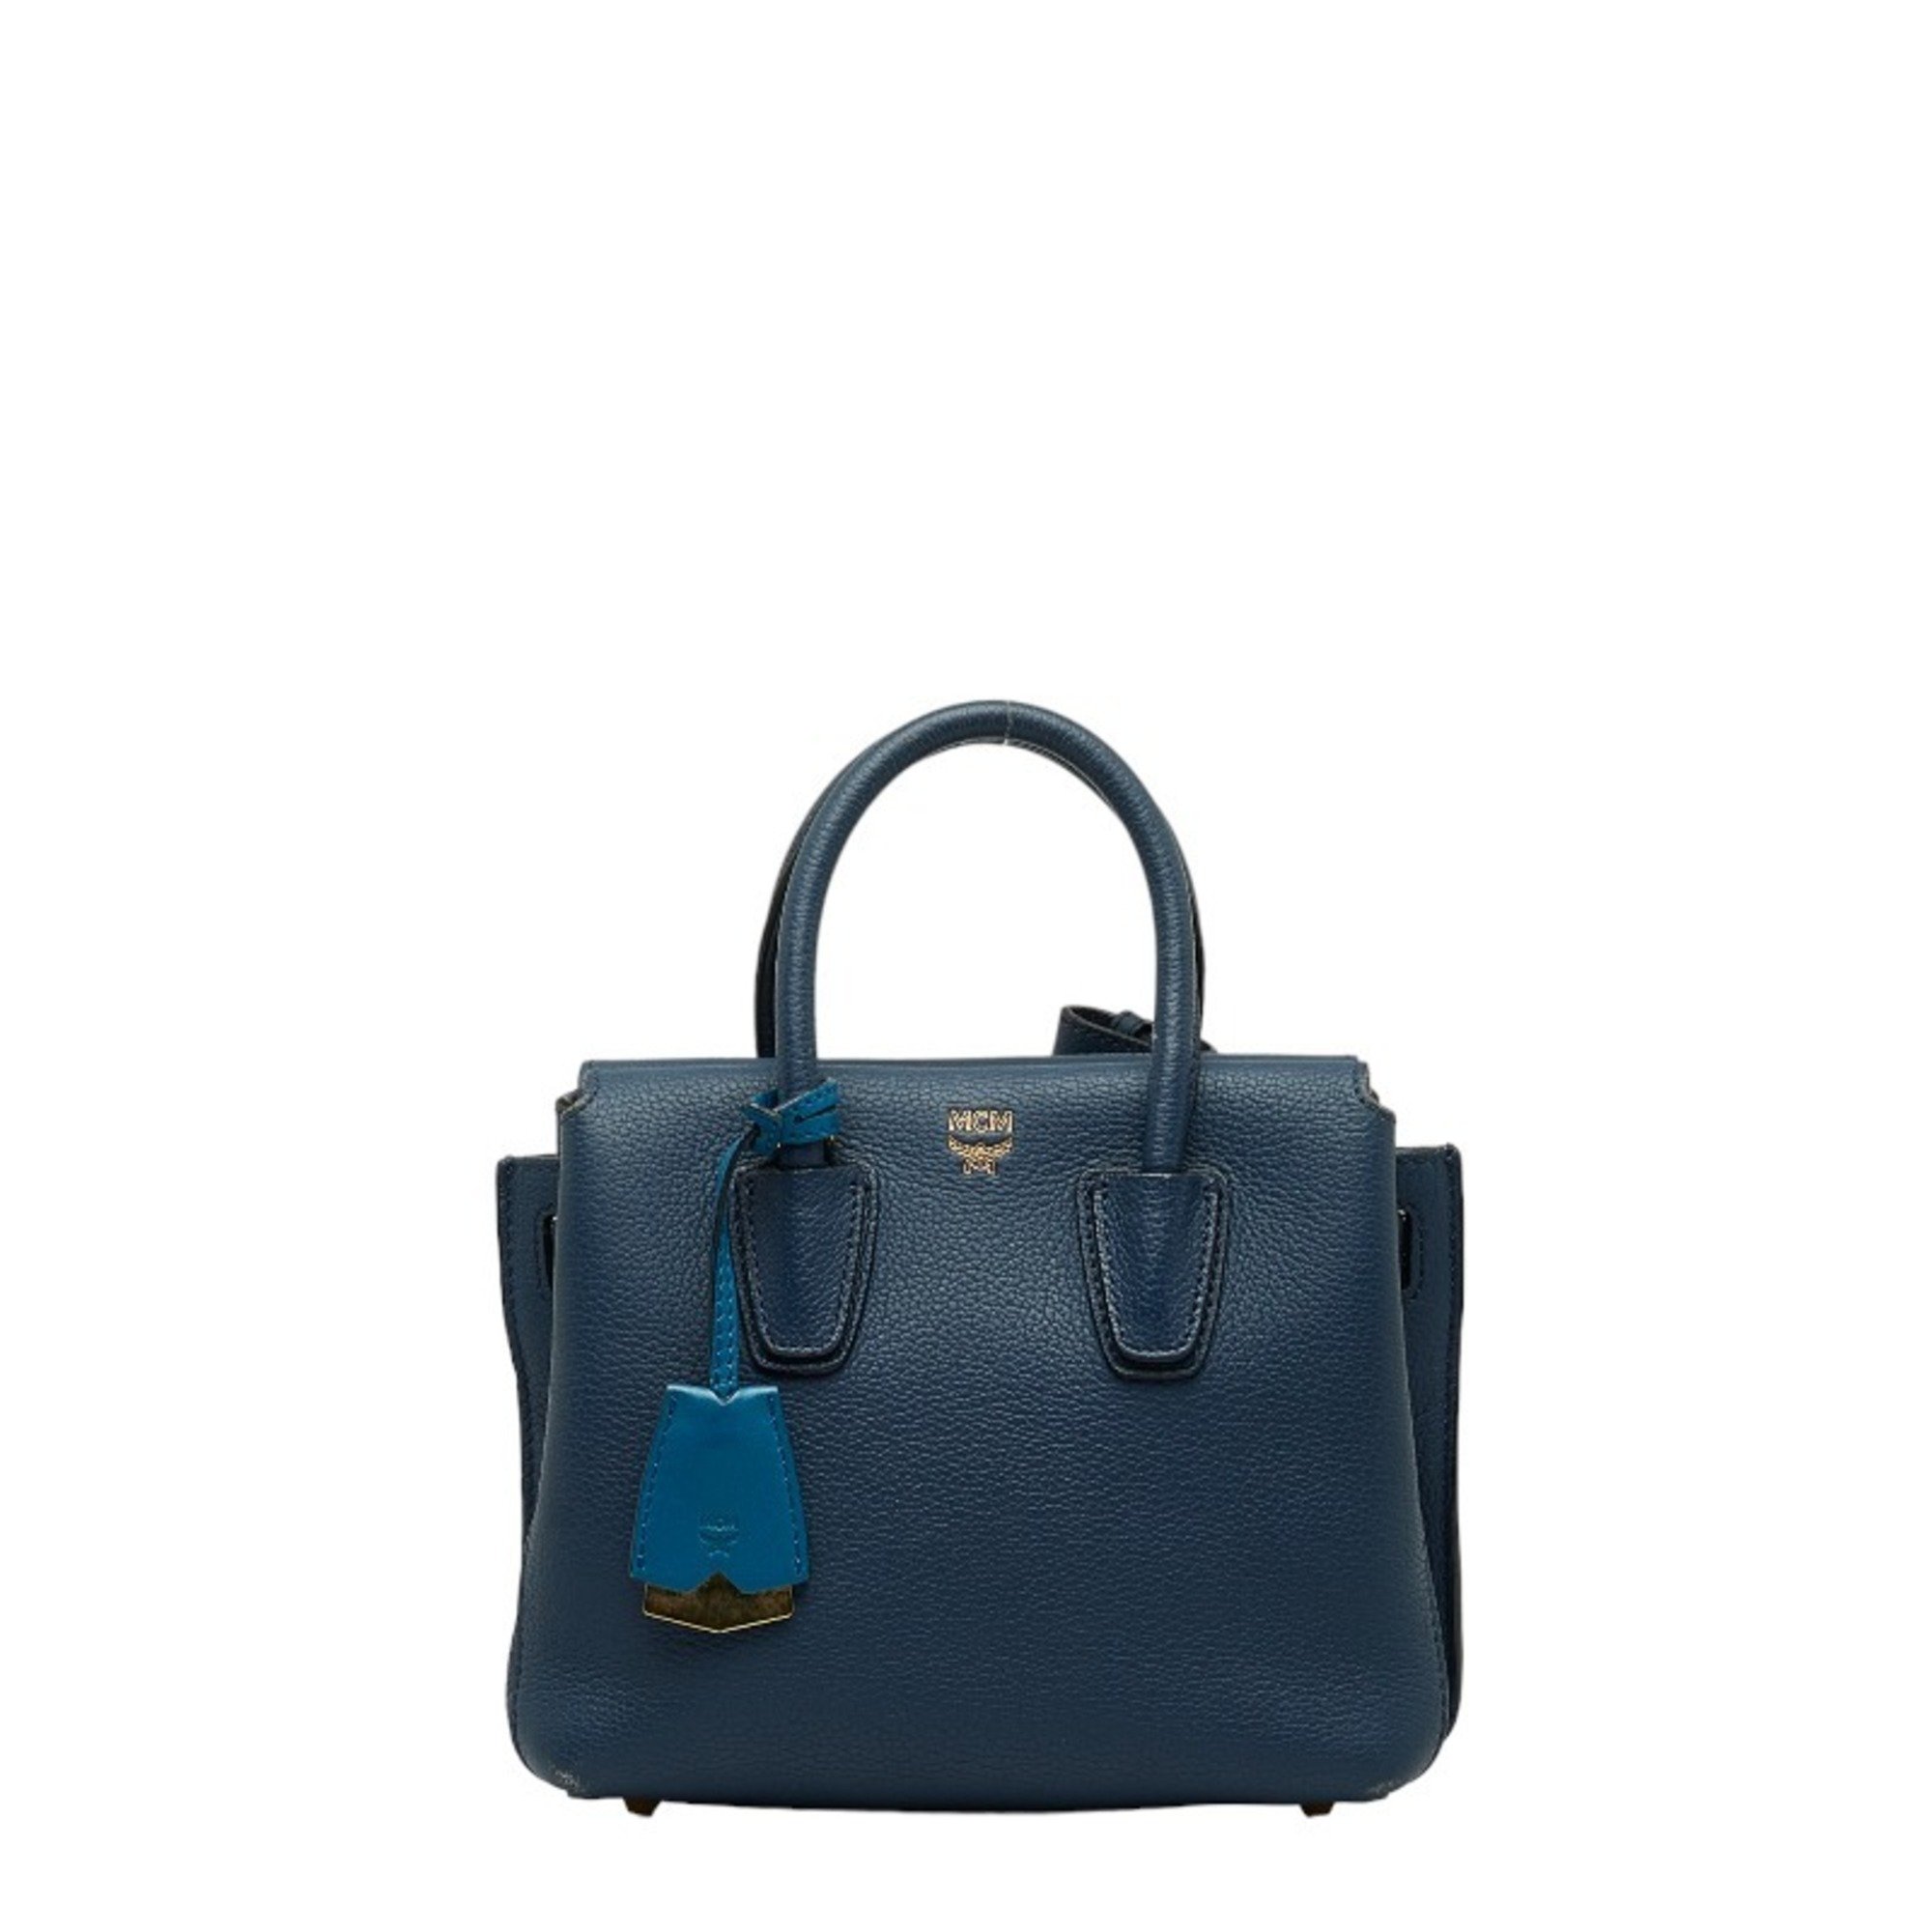 Blue Leather Shoulder Bag with Charm and Strap